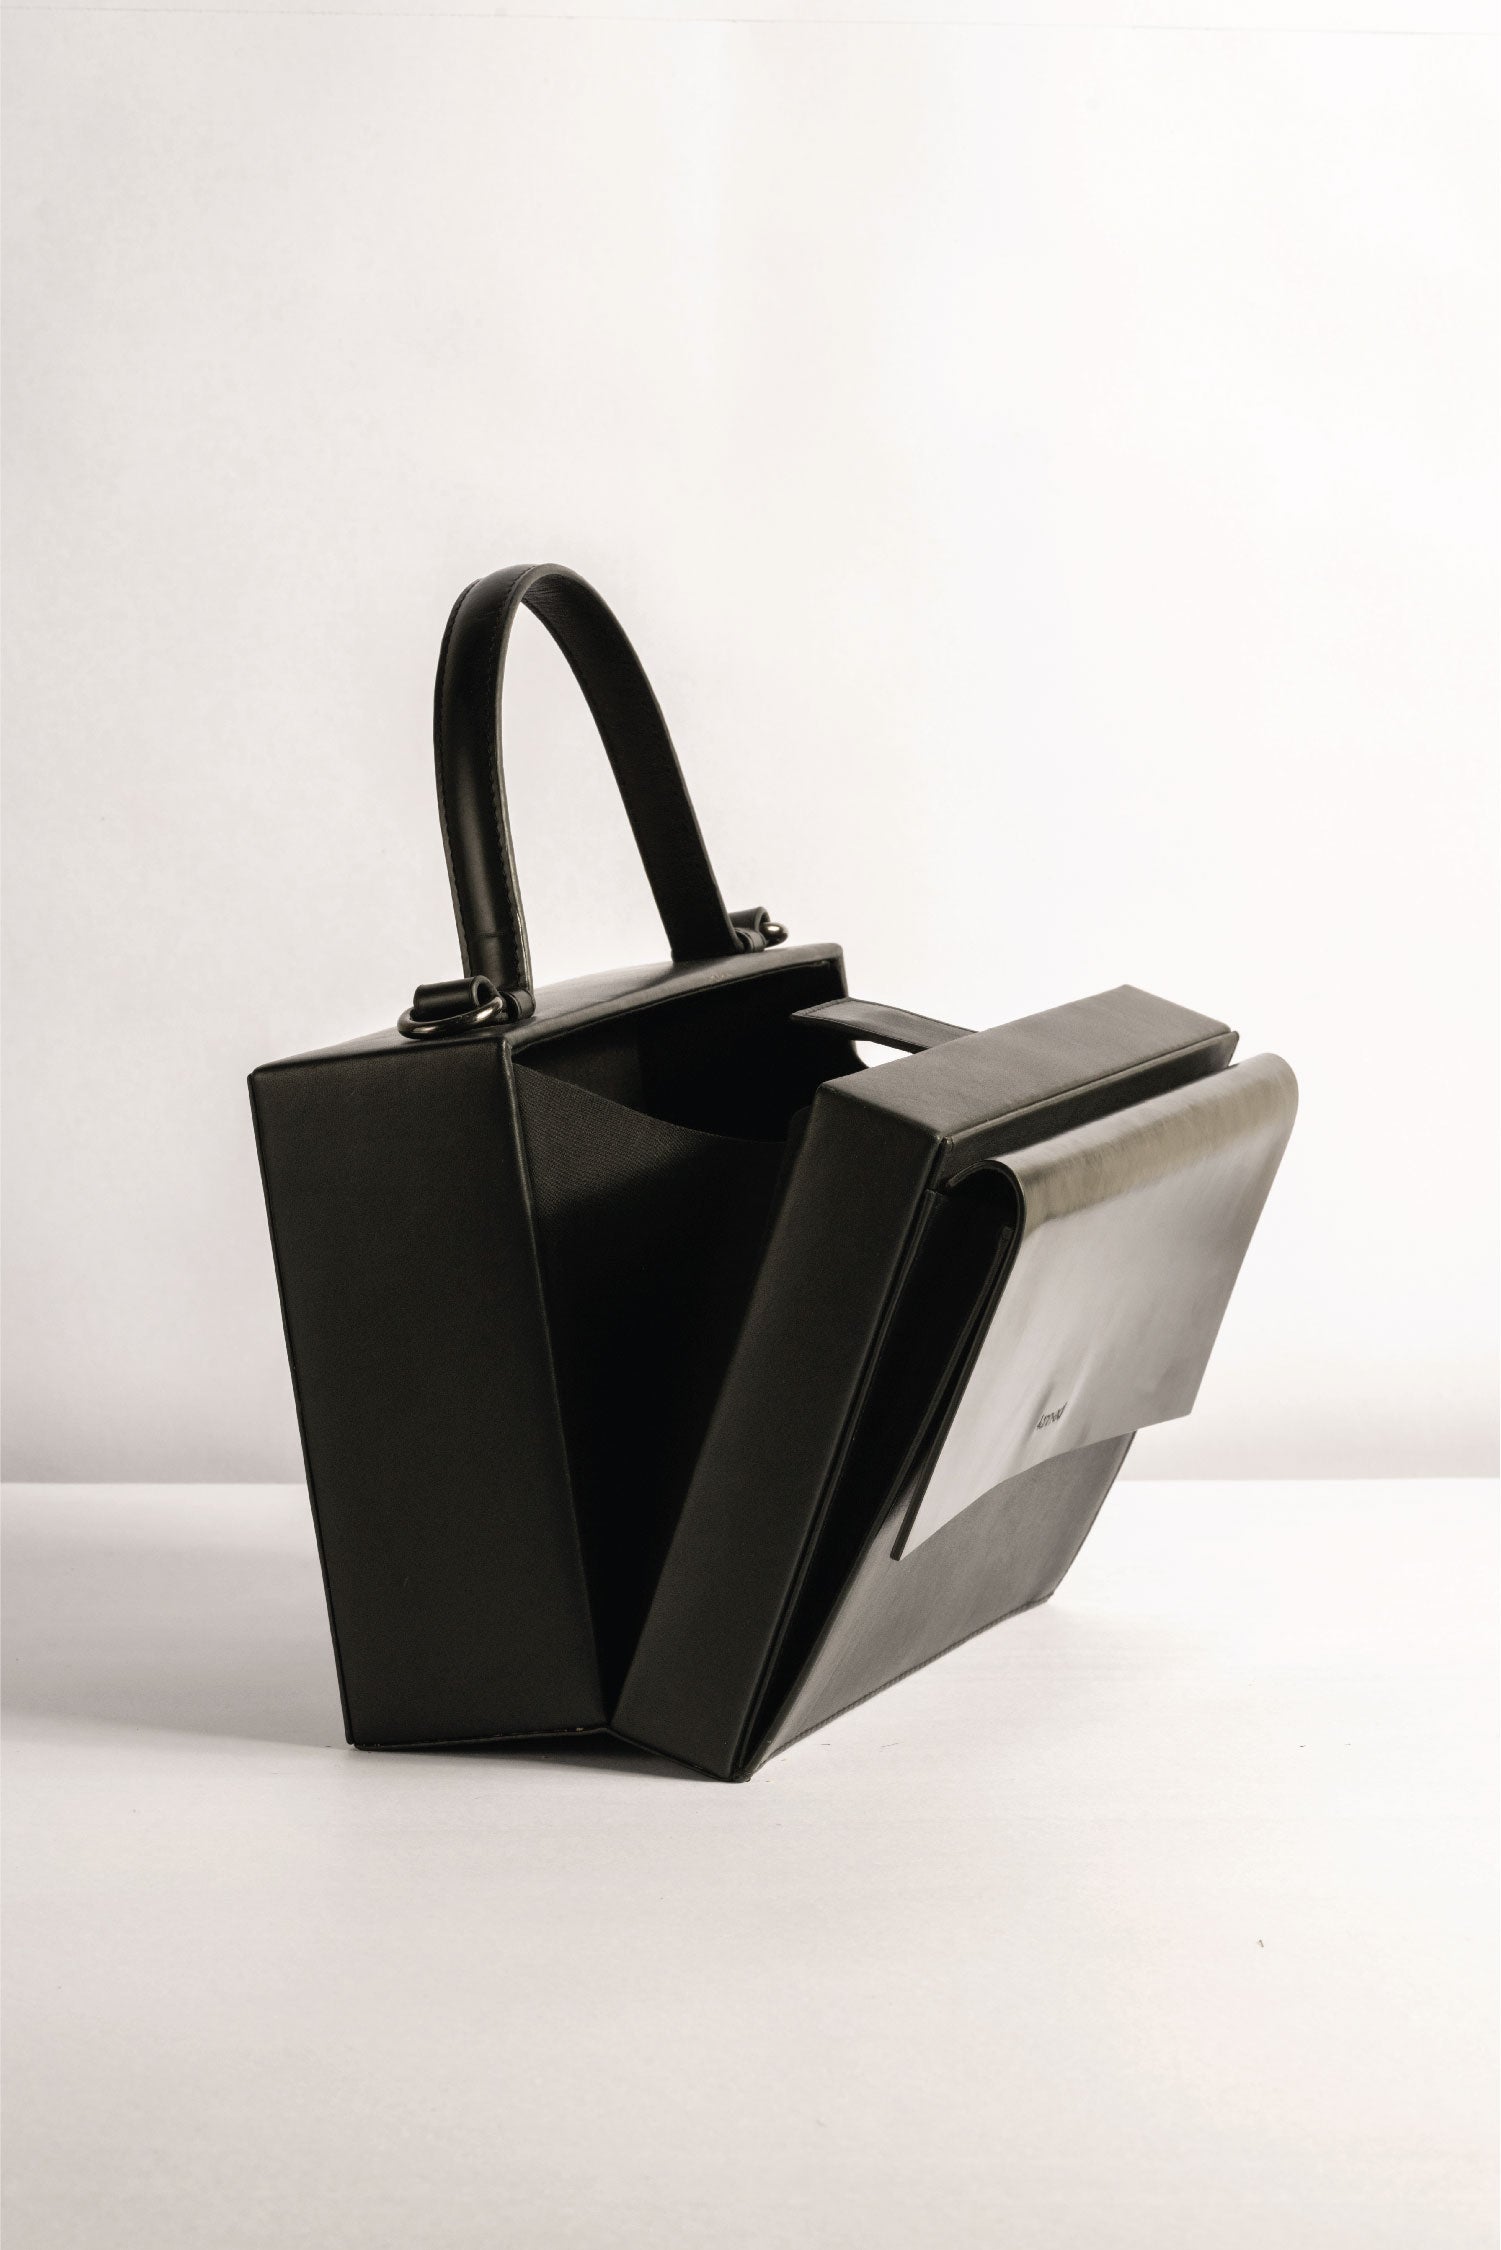 Box Bag leather, Tann-ed, crafted in genuine leather with a top handle and side and crossbody sling